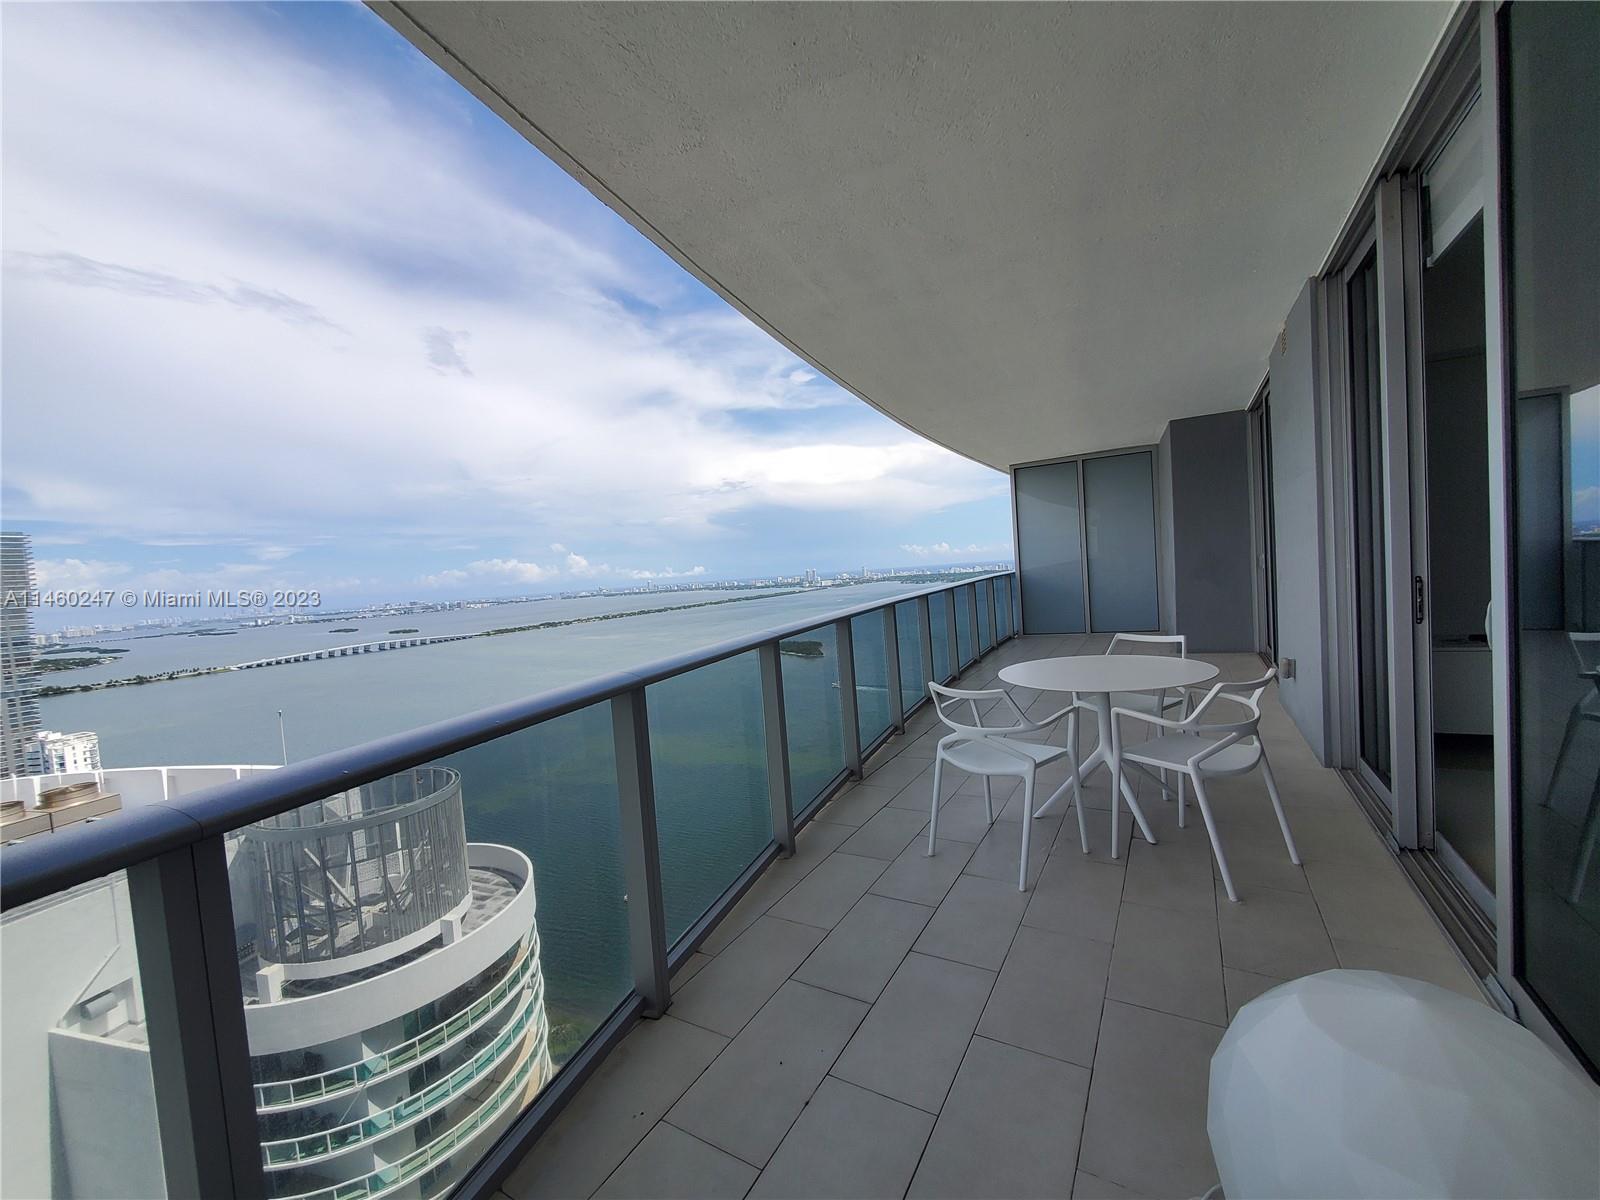 Aria on the Bay. Luxurious furnished 2-bedroom. 2 Parking Spots. Private elevator entrance to your foyer, premium stainless steel appliances, Italian wood cabinets, quartz countertops, porcelain floors throughout the unit, floor to ceiling windows. Master bath & second bath w/ dual sinks. Large balcony with an amazing view of the Bay. 
Full service Building with 2 curved sunrise/sunset pools, Hot Tub, Indoor/Outdoor Social Room, State of the Art gym and yoga room, Theater, Kids Playroom, Business Center. Valet Parking. Minutes from Wynwood, Midtown, Design District, South Beach and Downtown.